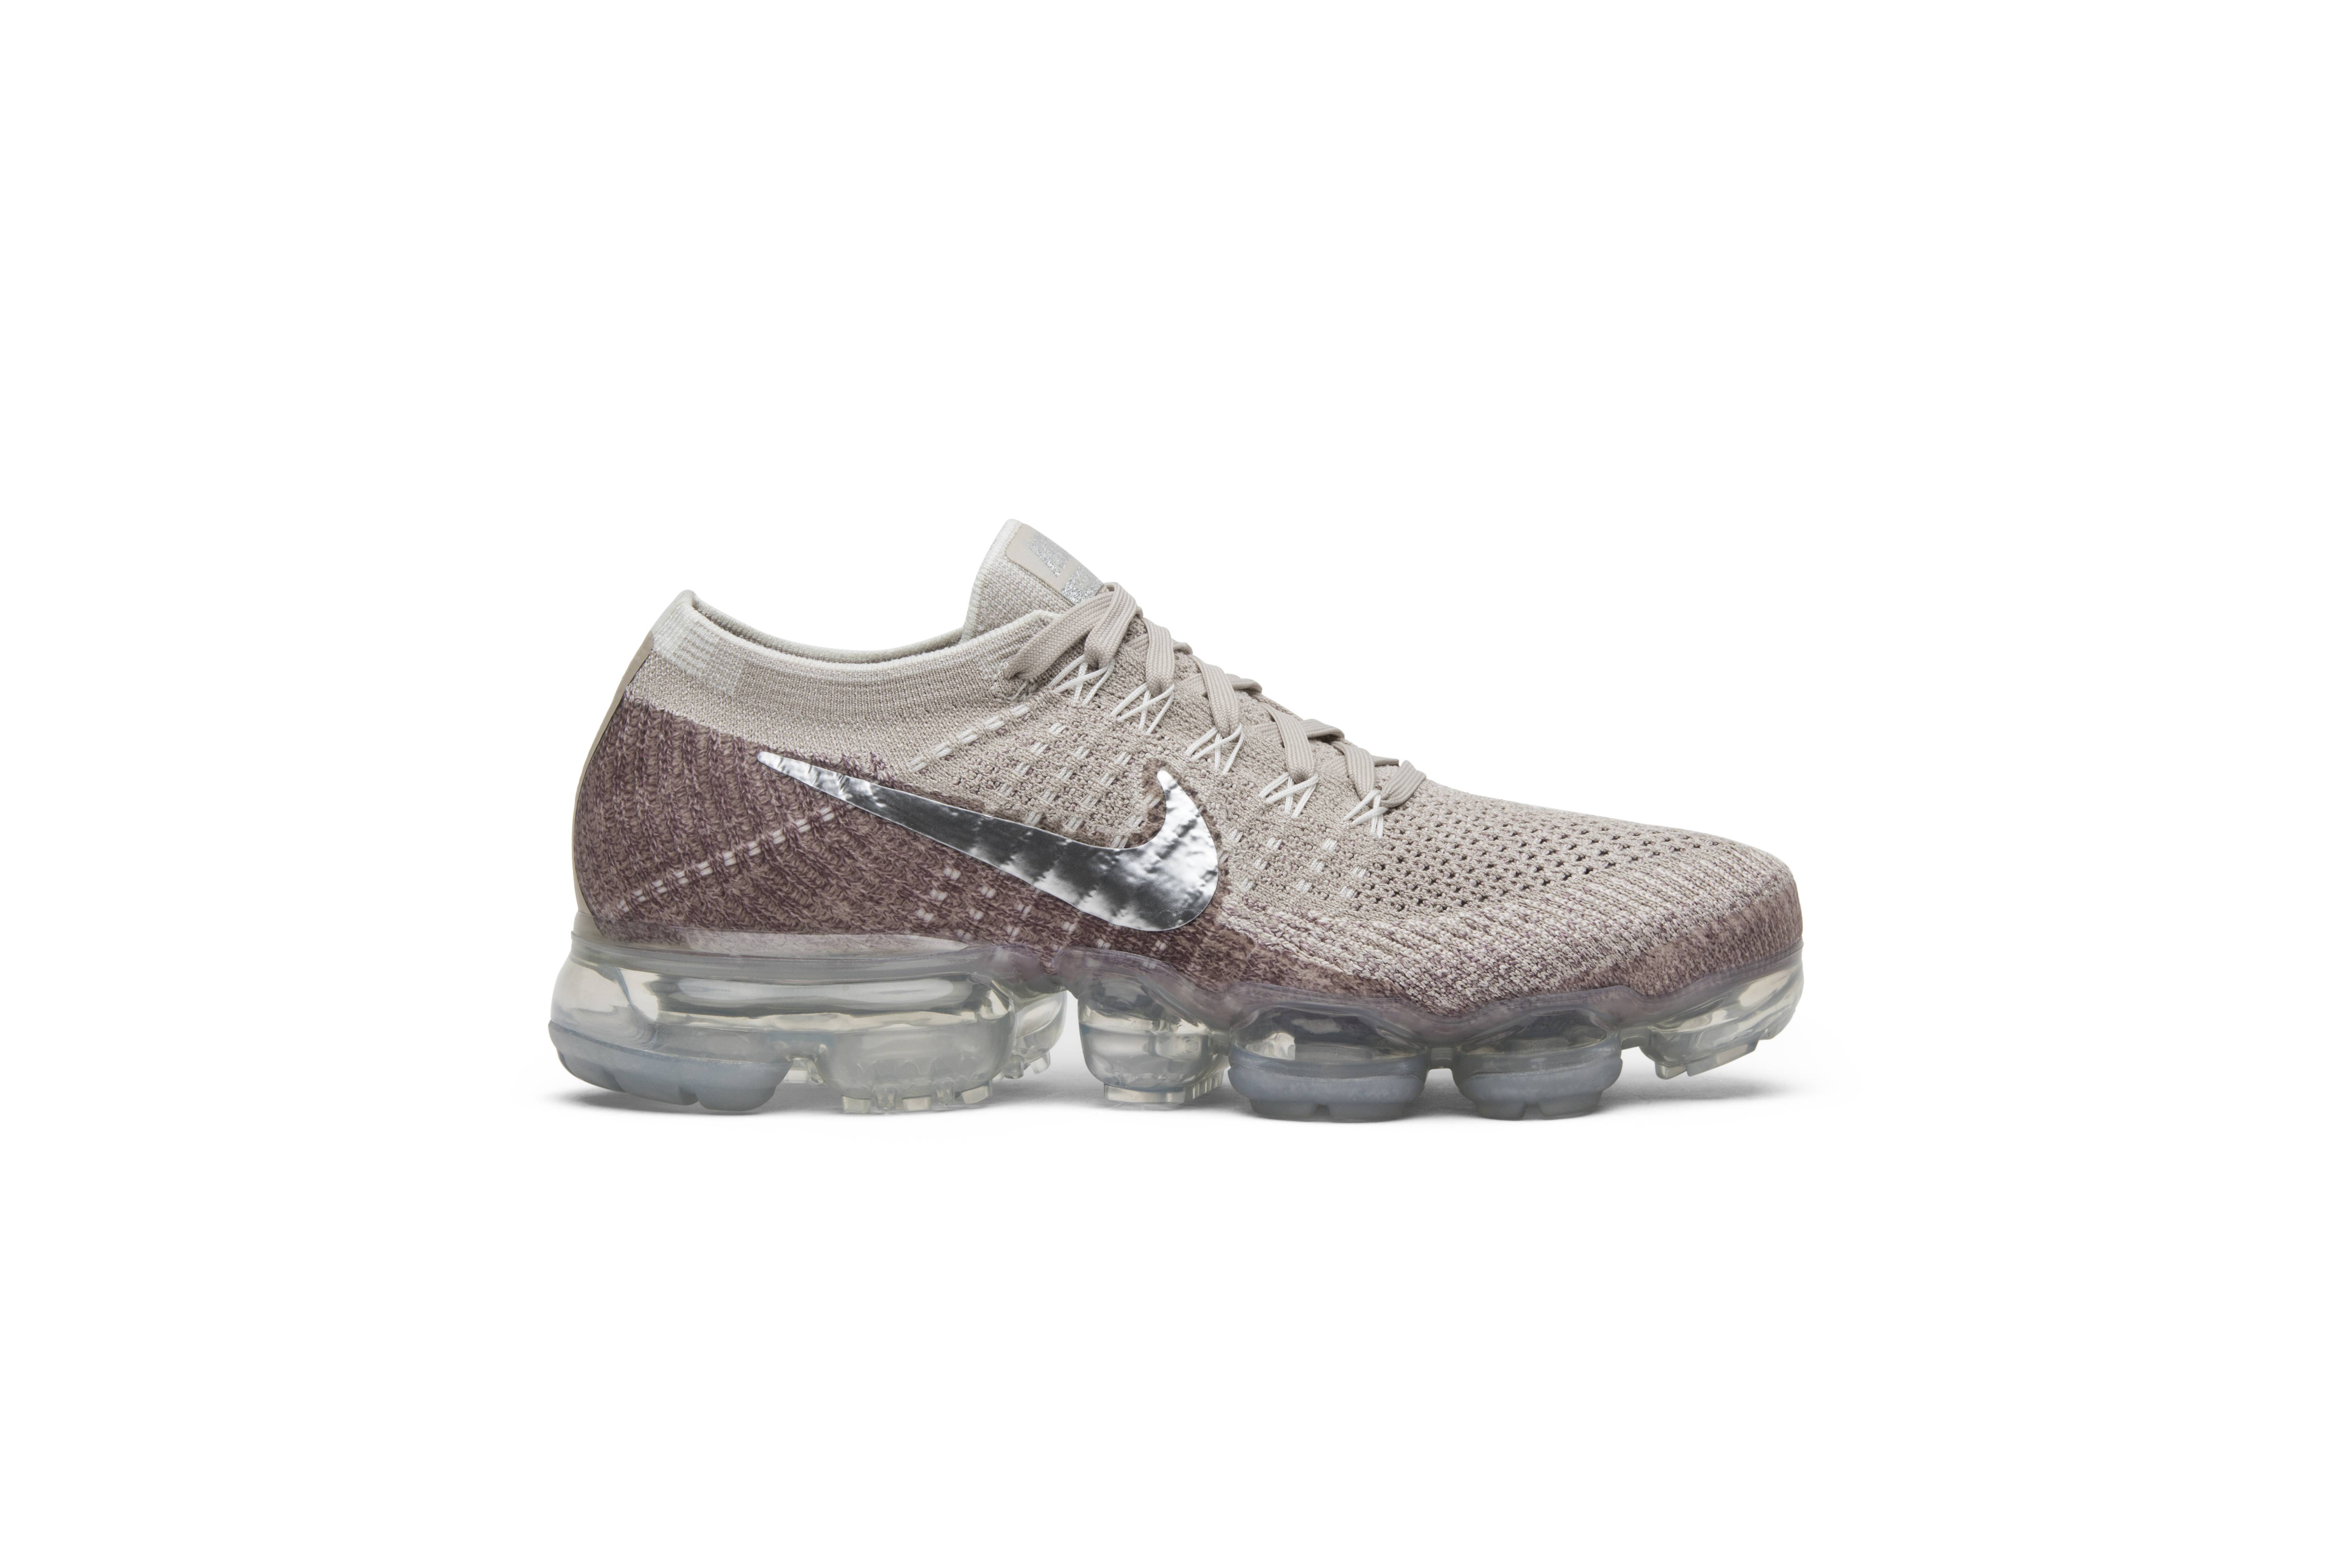 vapormax without strings